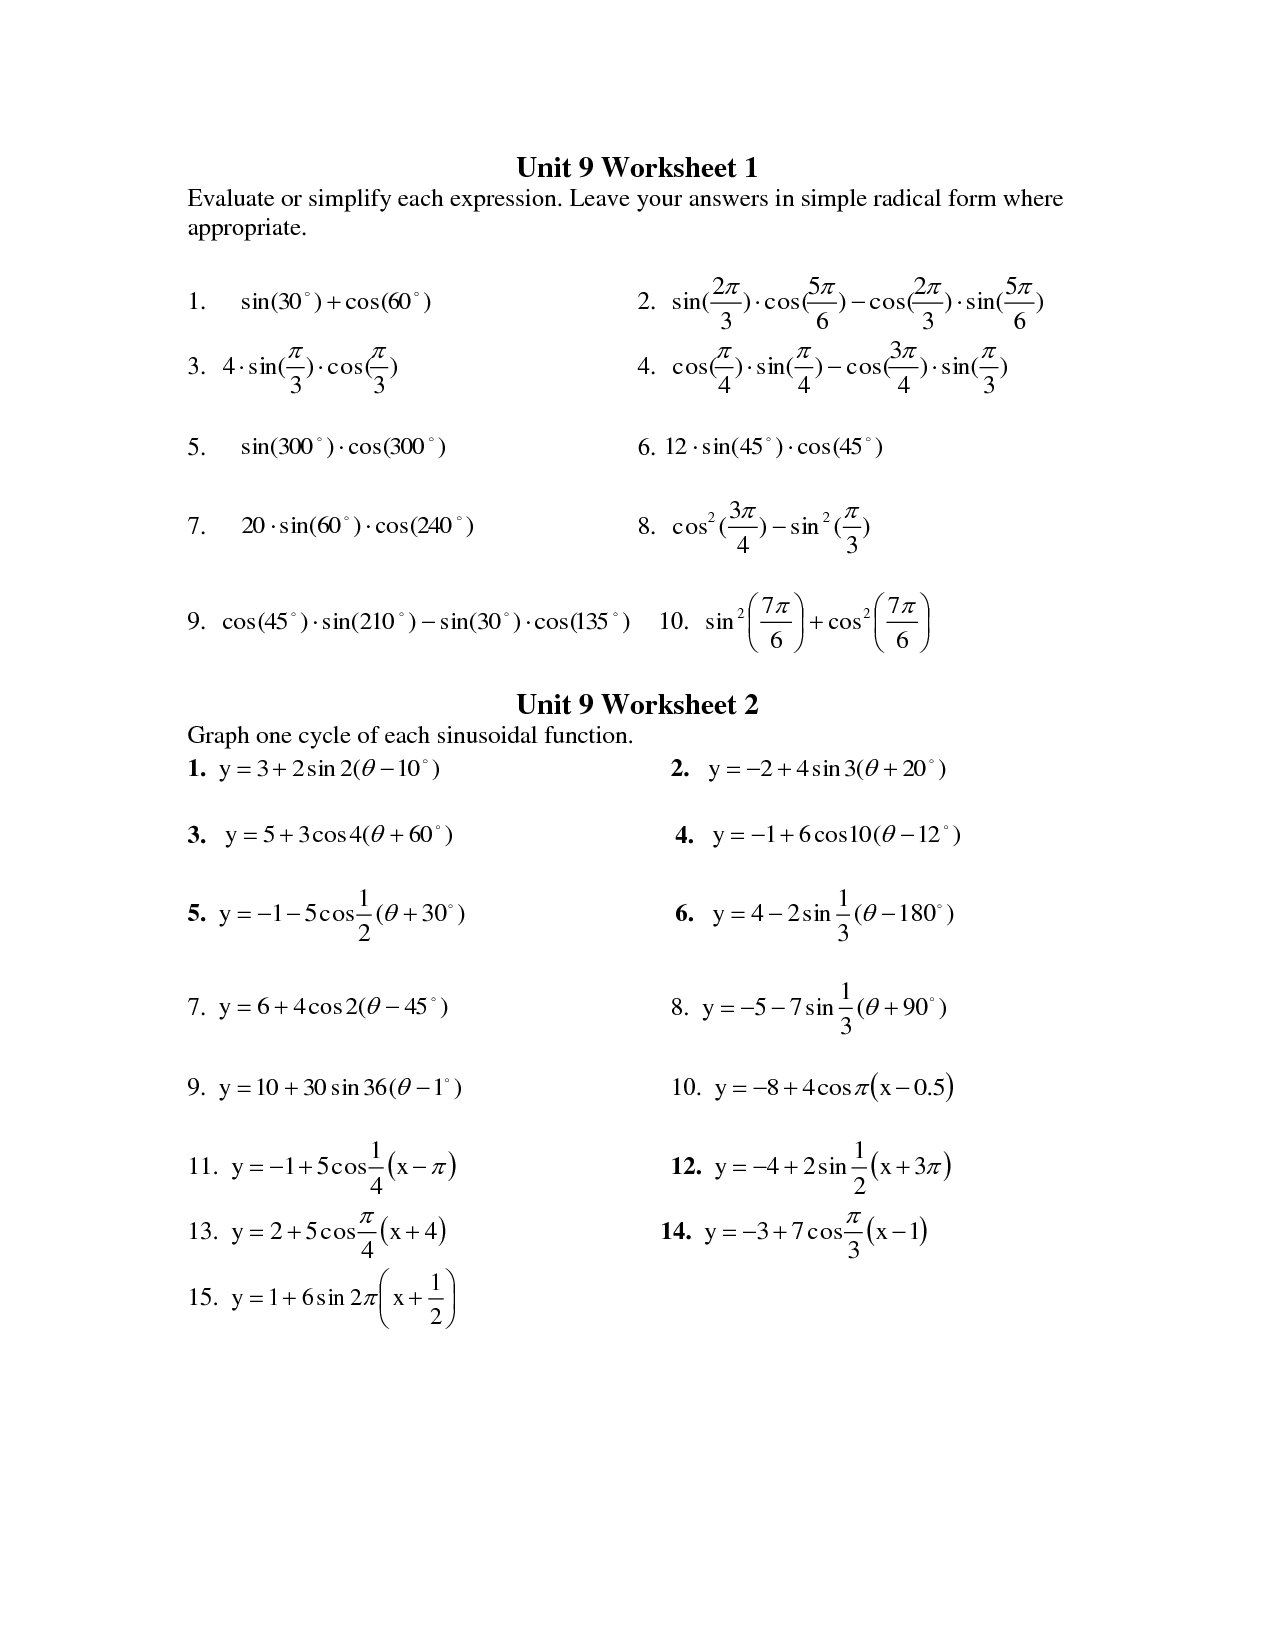 Pre-calculus Worksheet - Simplify Expressions and Graphing Cycles